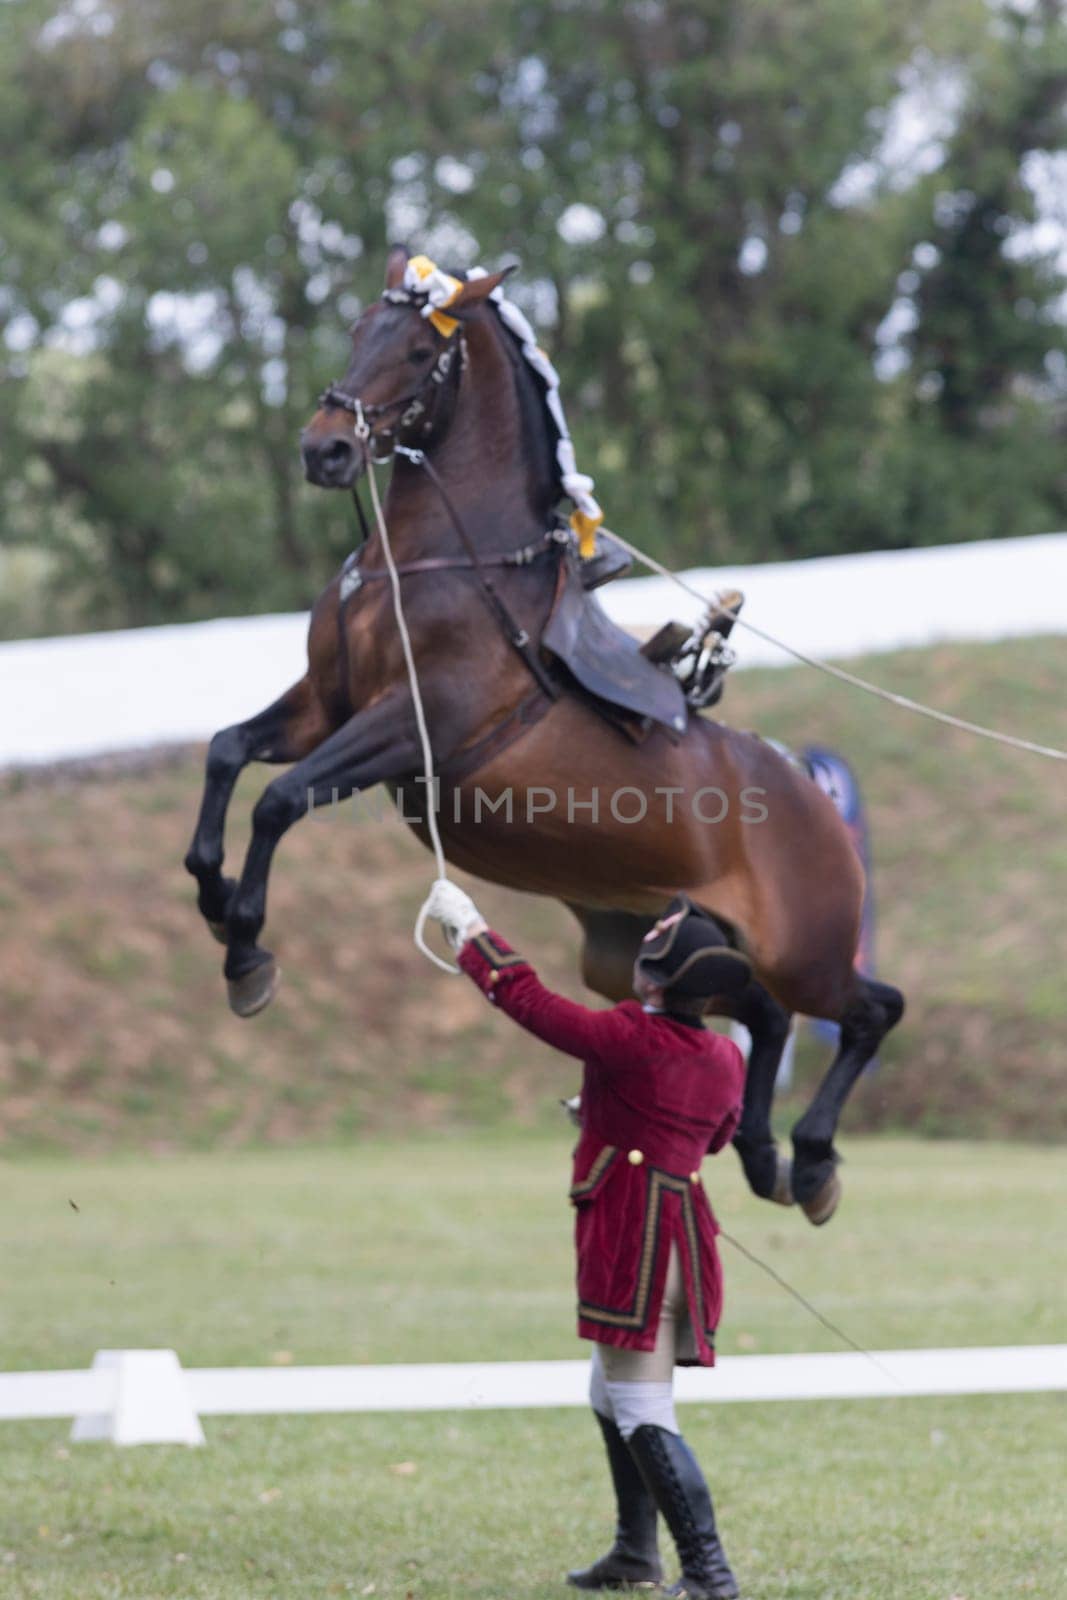 19 may 2024, Mafra, Portugal - competition in military academy - man dressed in a red coat is holding a horse in the air. The horse is brown and has a white mane